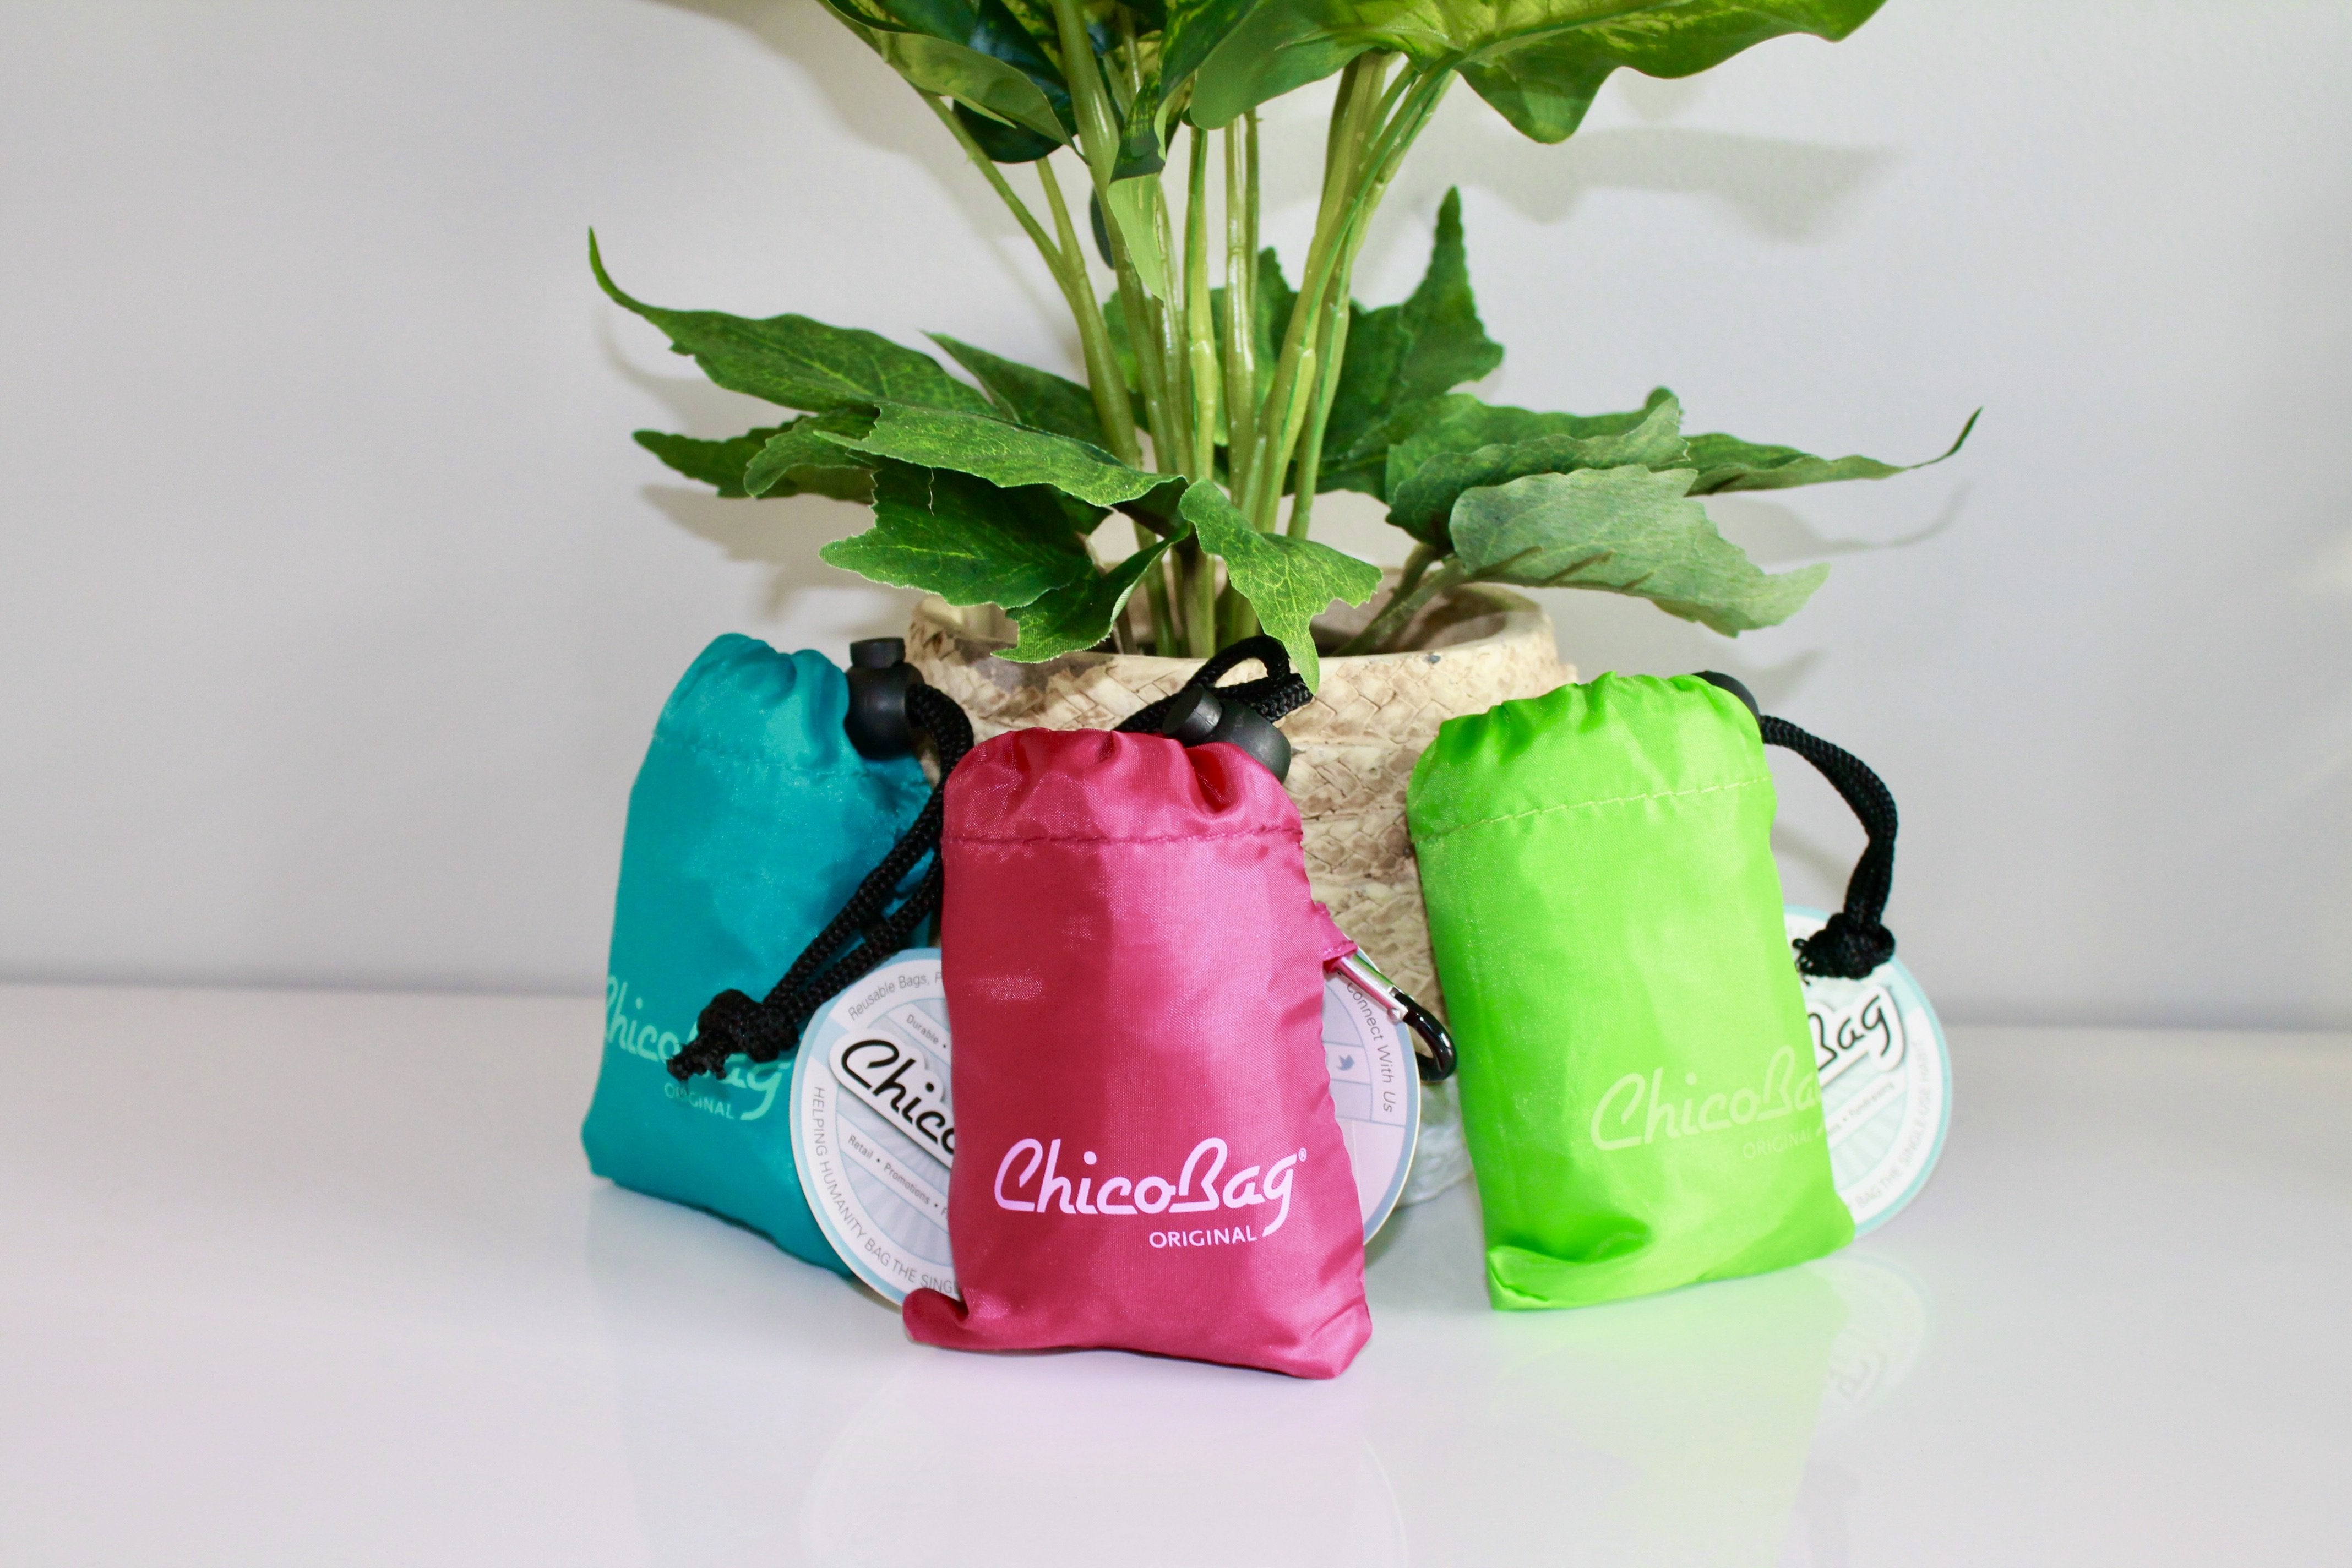 Chico Bag “To Err Is Human, To Green Divine” – Goods for the Planet